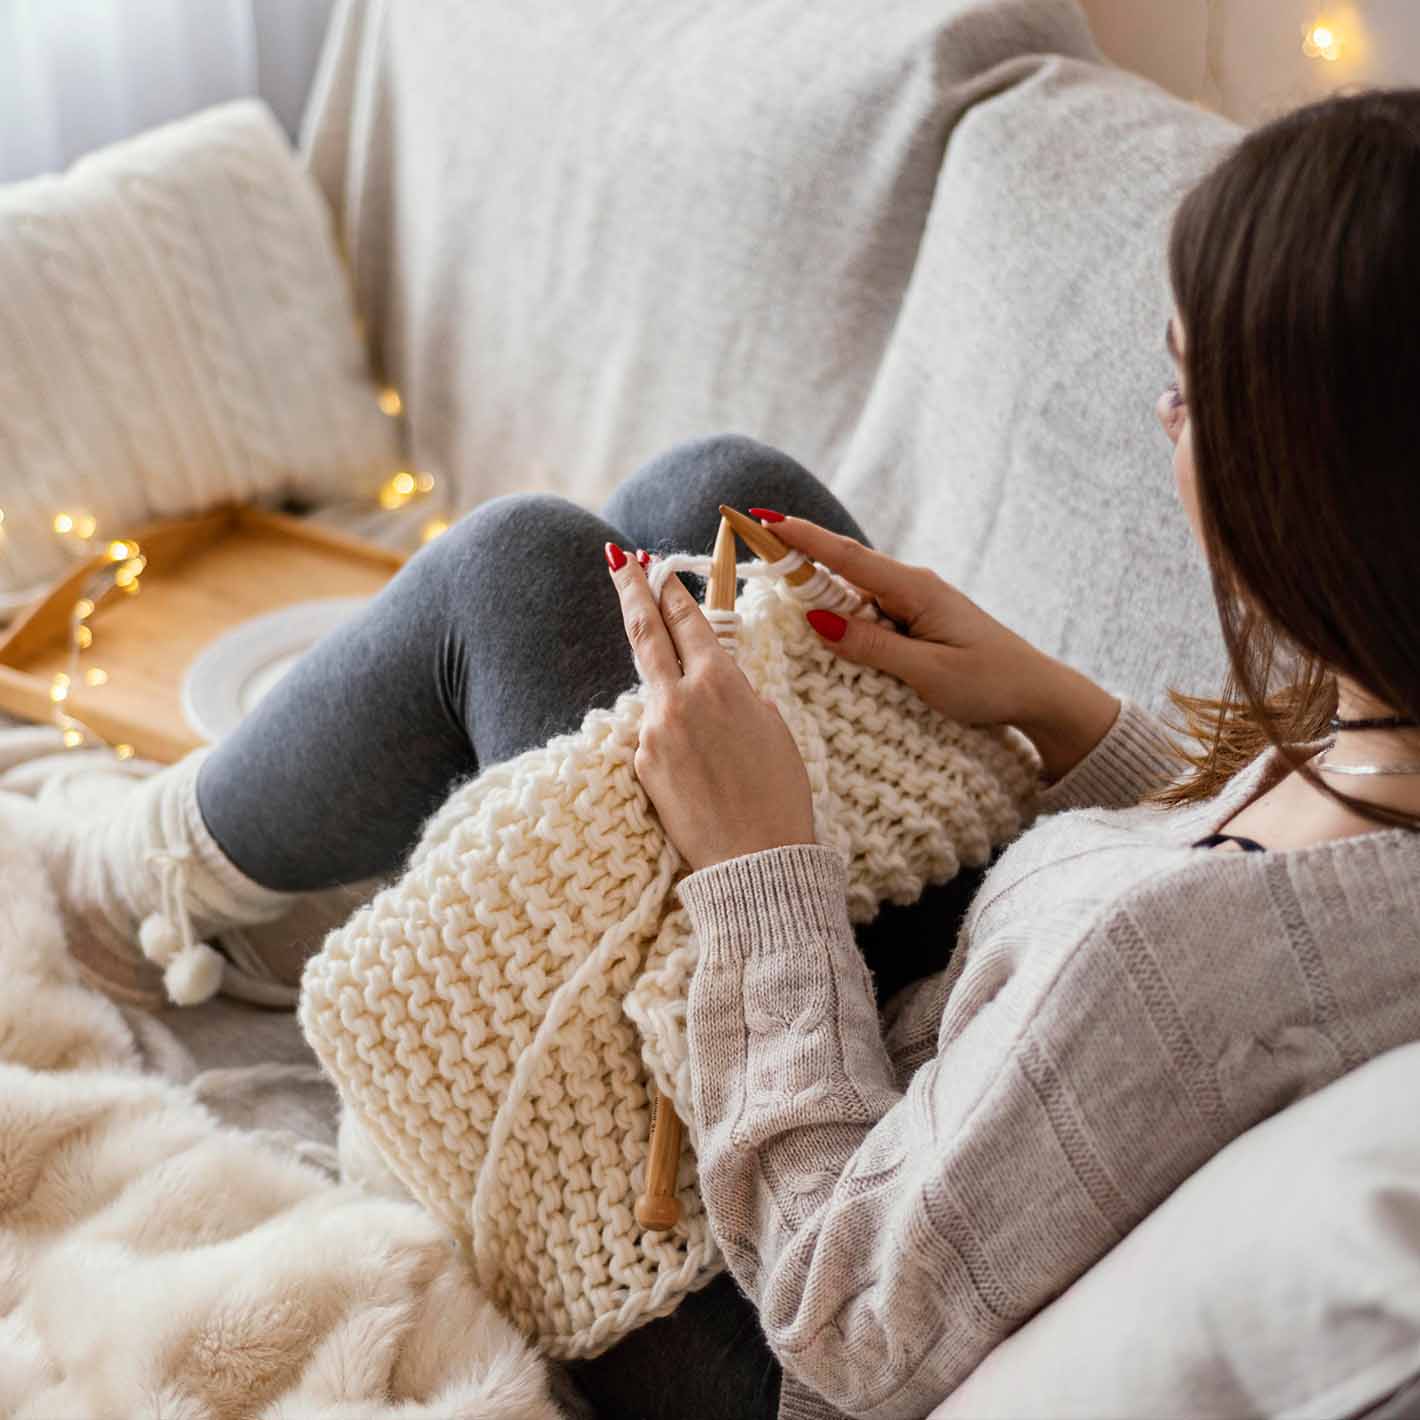 young lady knitting on couch surrounded by blankets, lights and pillow